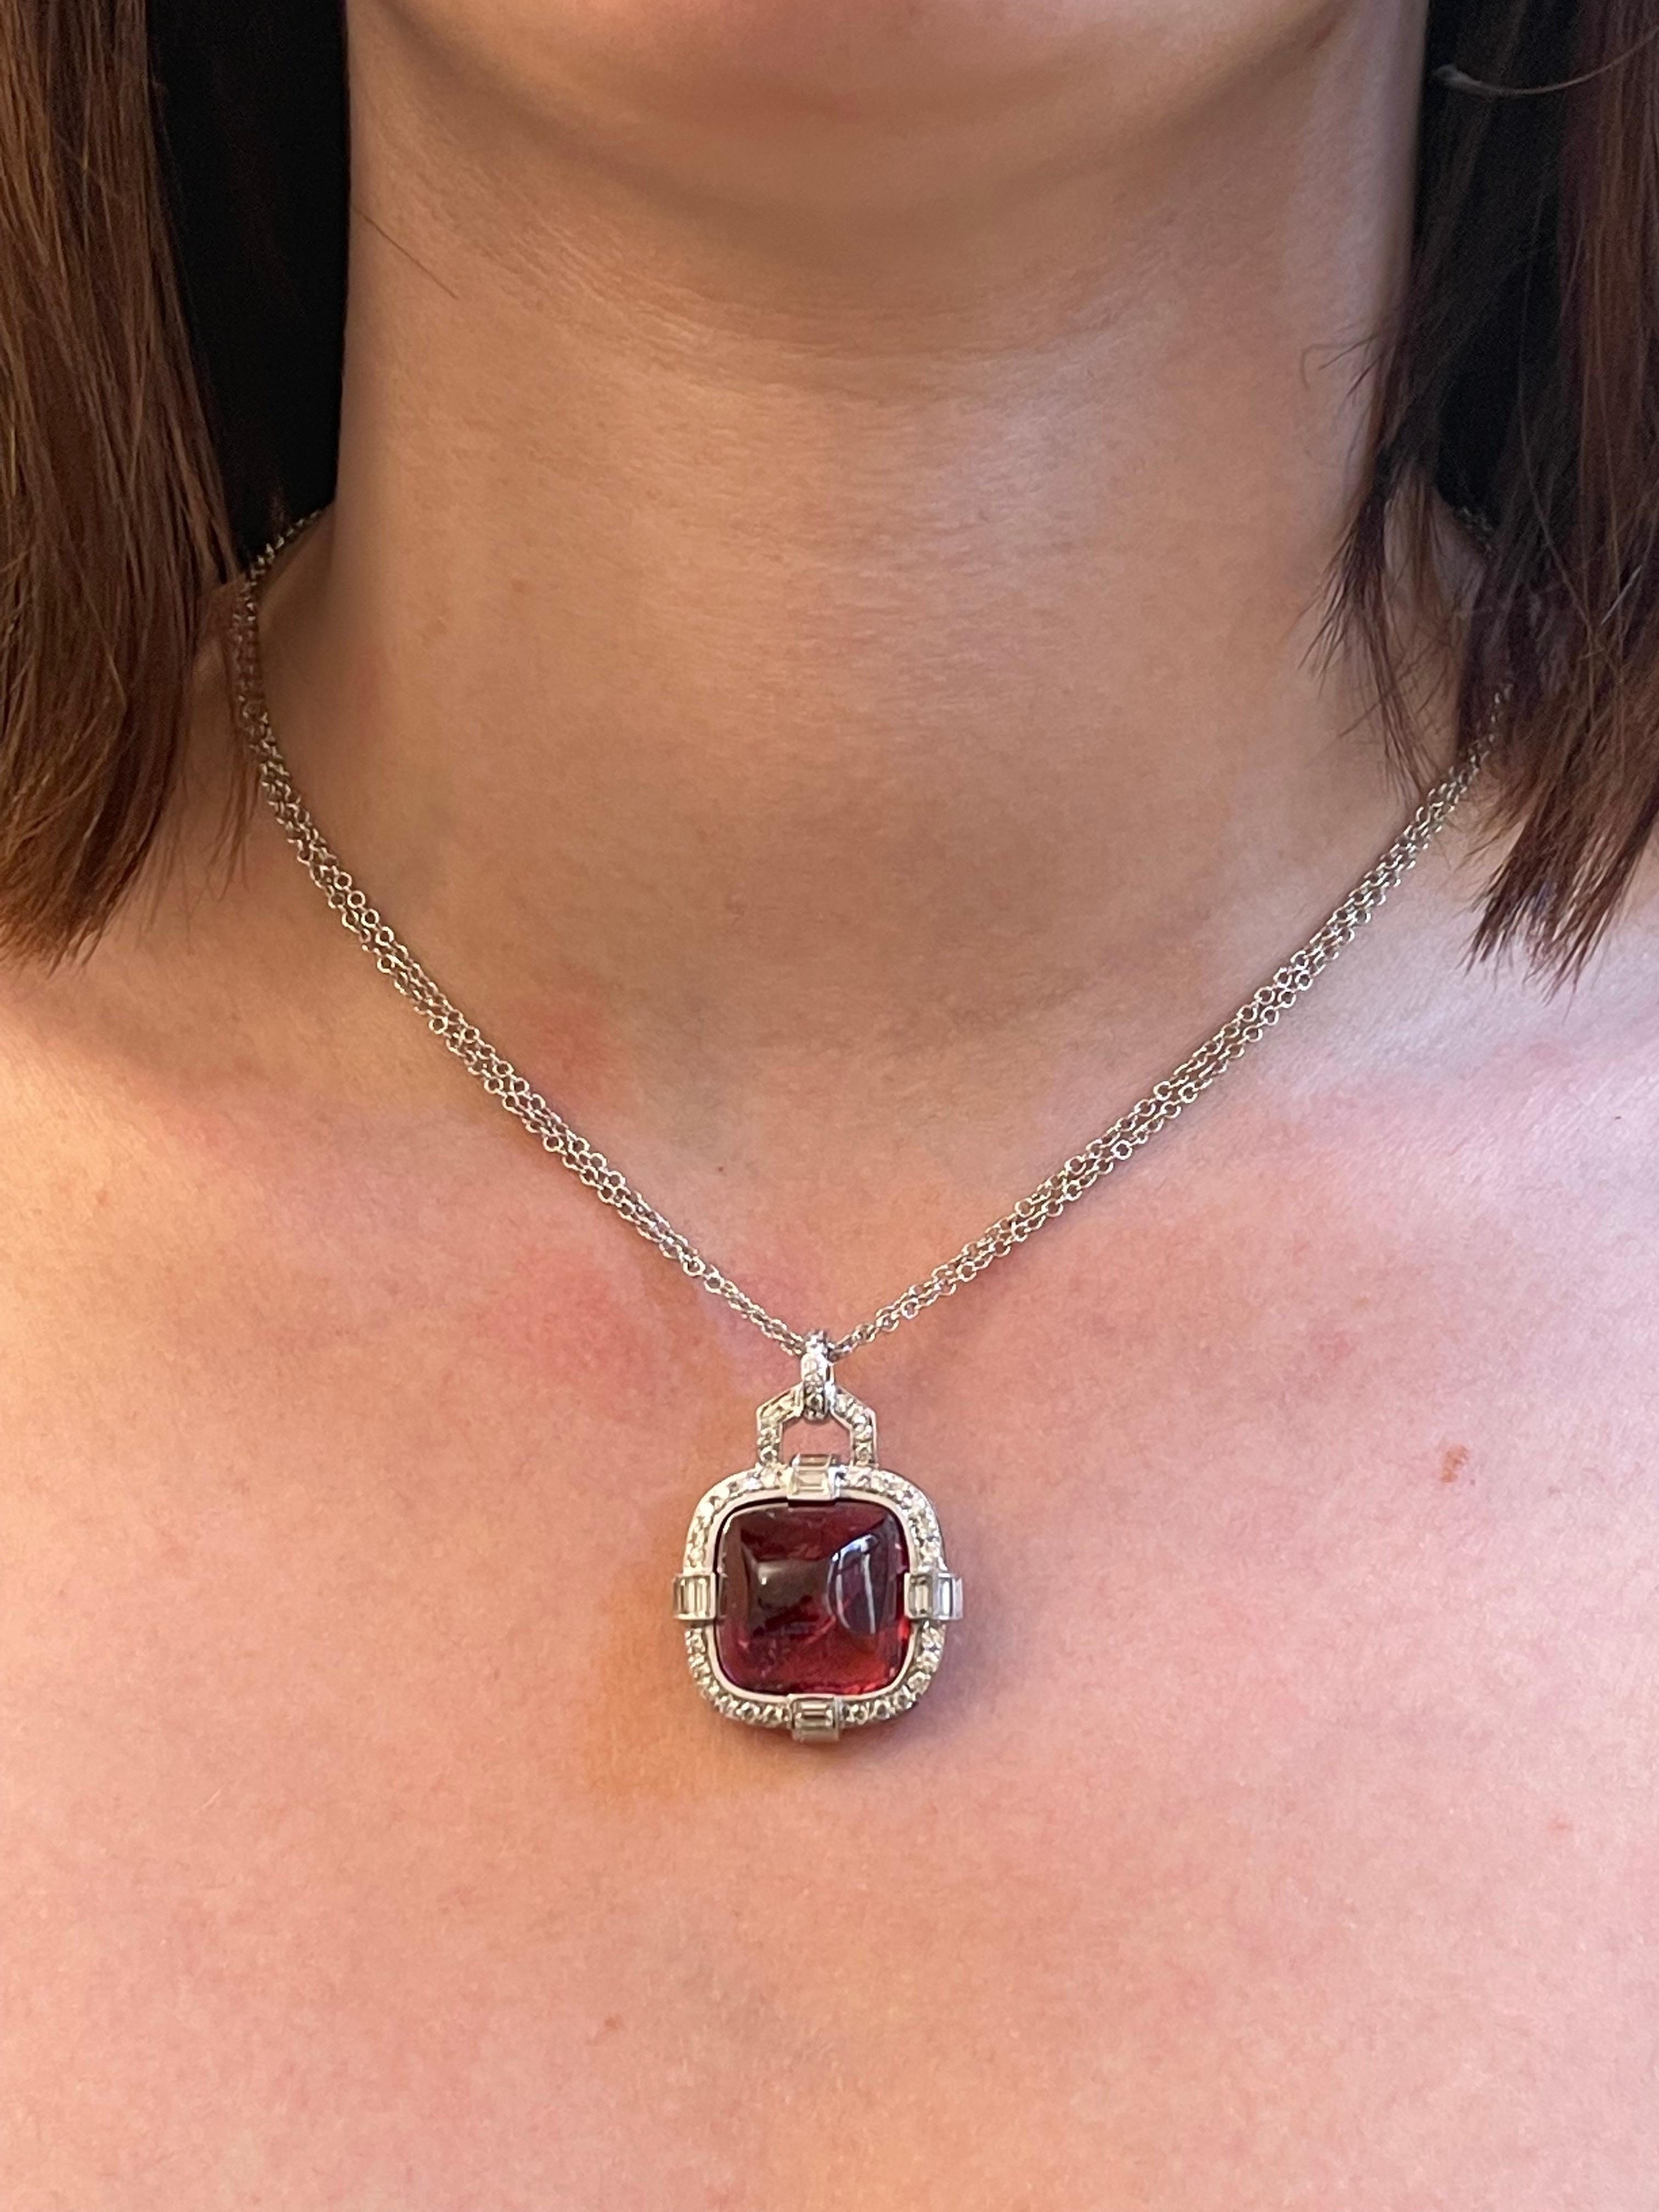 Pendant White Gold 18 K Gianni Lazzaro 

Diamonds 40-1 ct HSI 
Tourmaline 28,24 ct

With a heritage of ancient fine Swiss jewelry traditions, NATKINA is a Geneva-based jewelry brand that creates modern jewelry masterpieces suitable for everyday